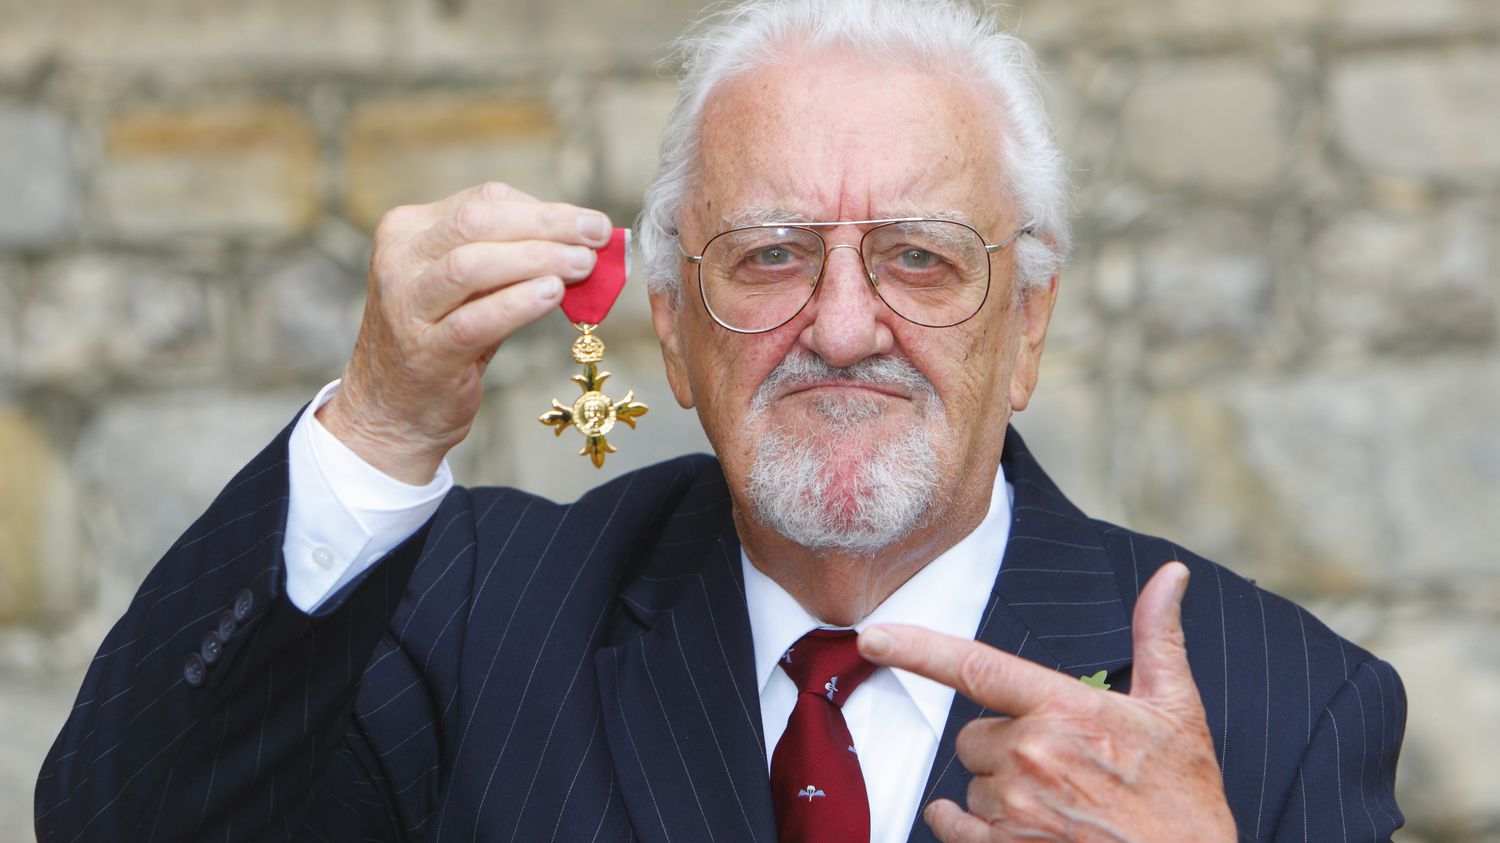 Bernard Cribbins, known for his roles in 'Doctor Who', is dead
